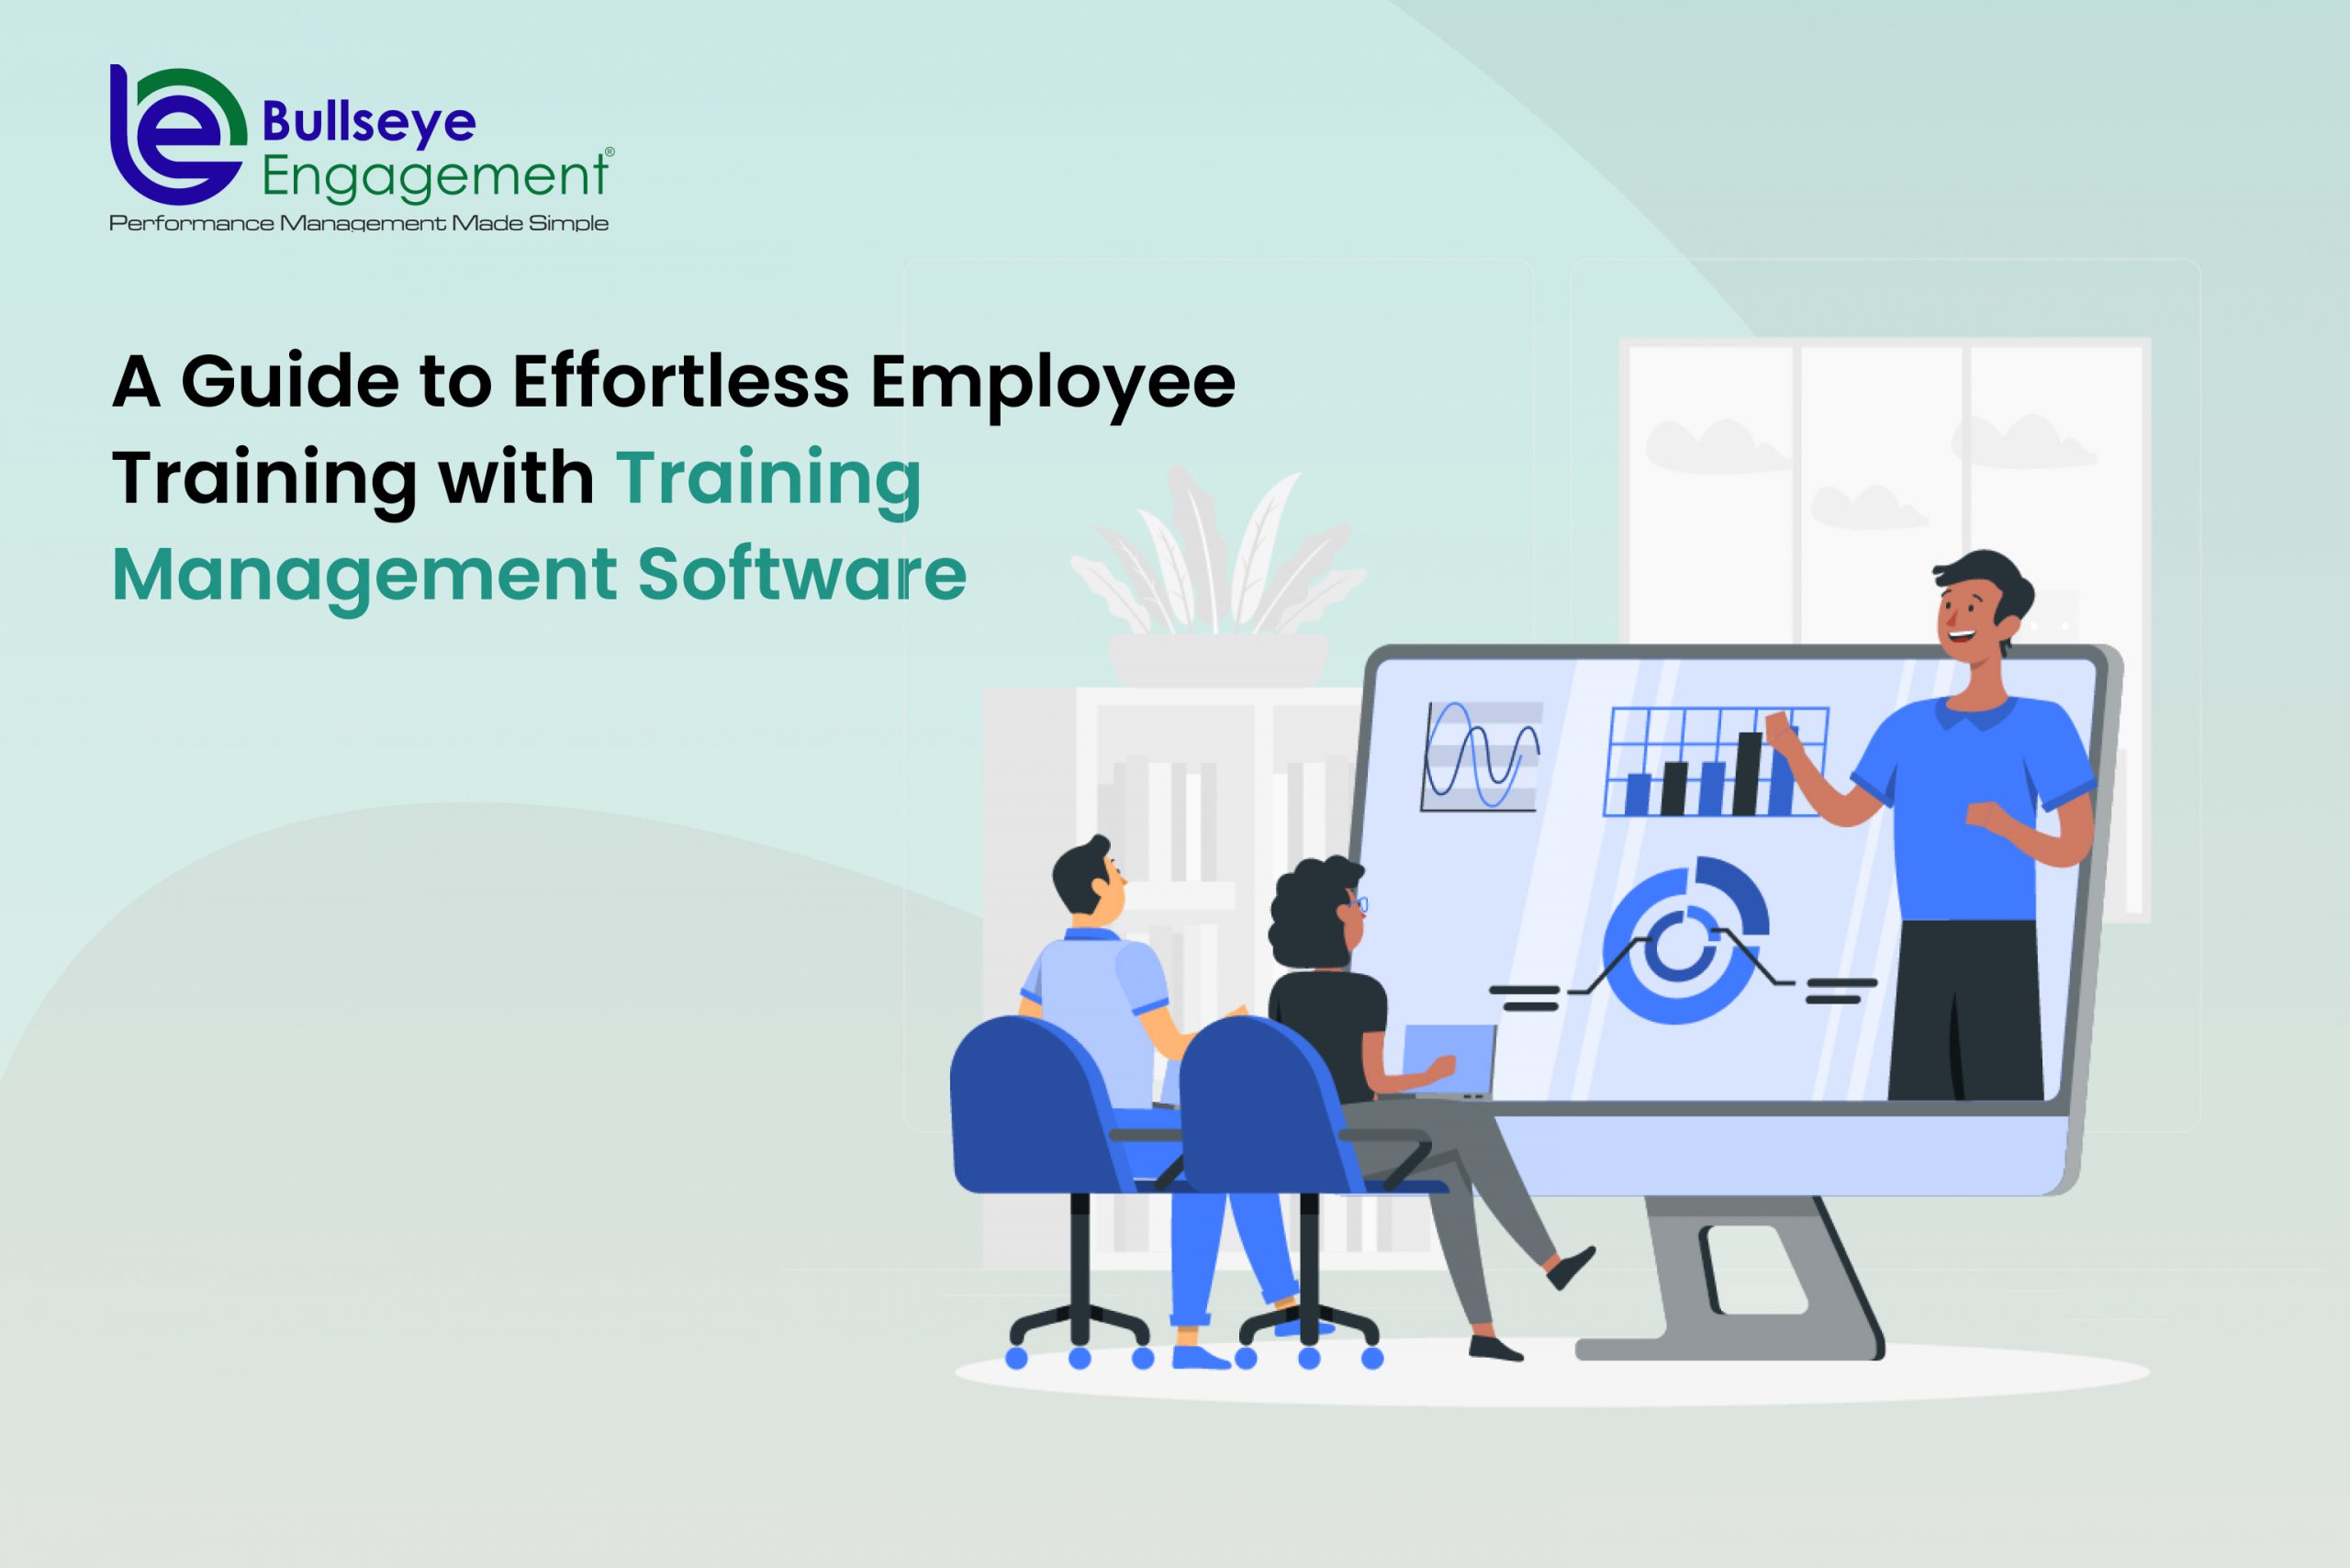 A Guide to Effortless Employee Training with Training Management Software